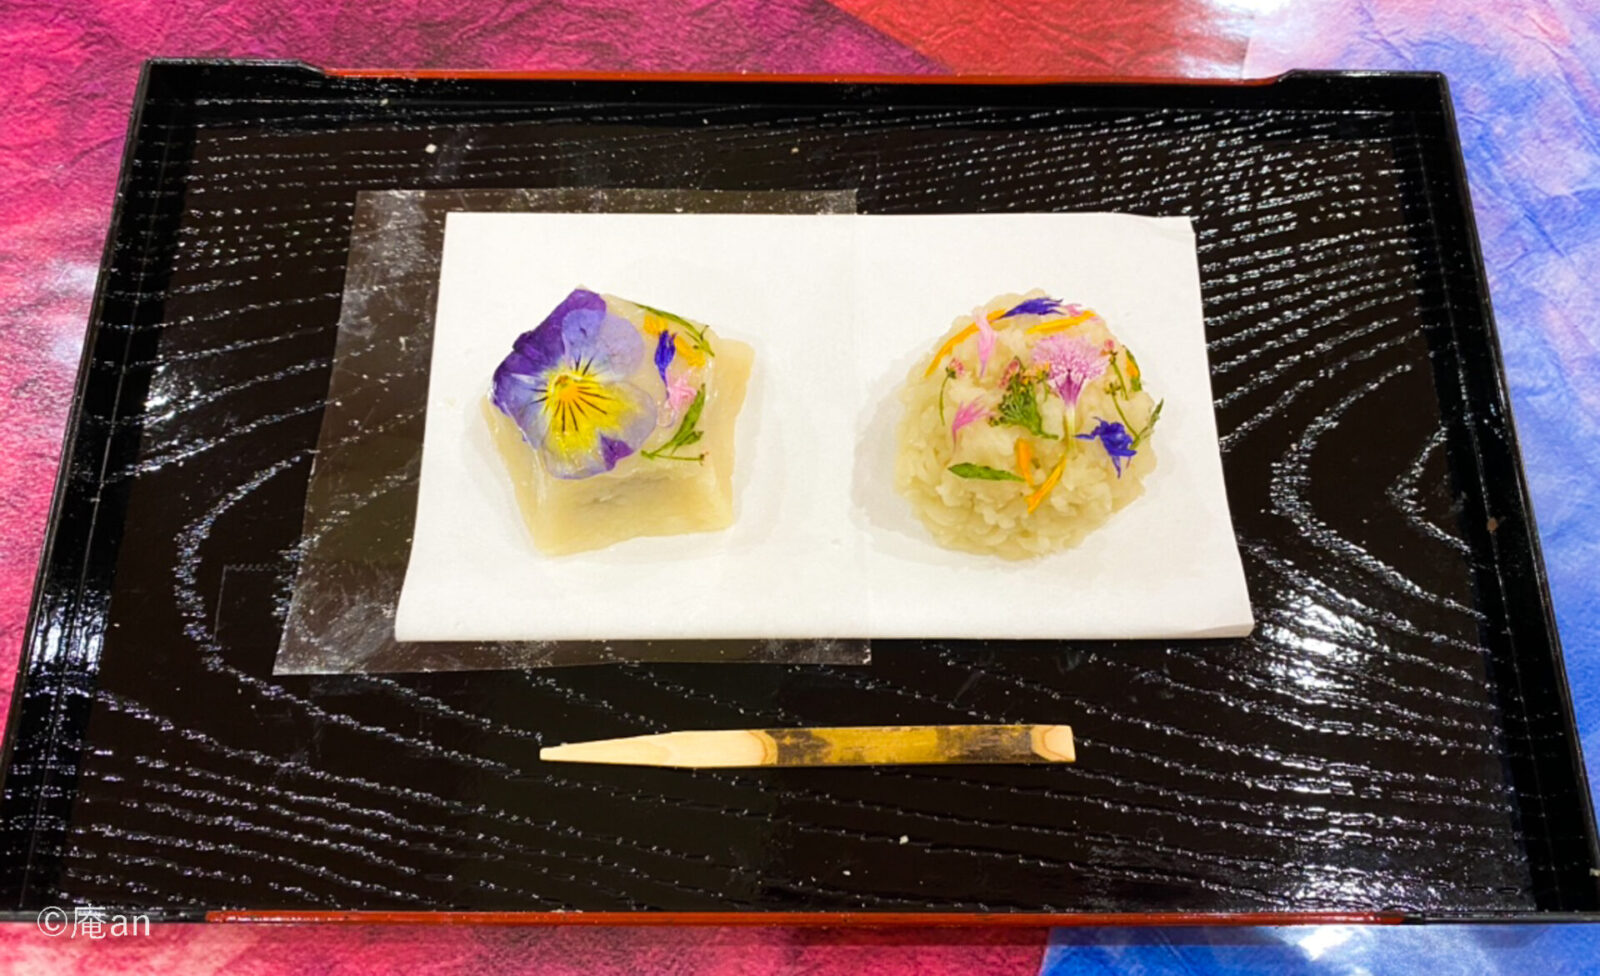 Japanese Traditional Sweets making with Real Flowers and Tea Ceremony